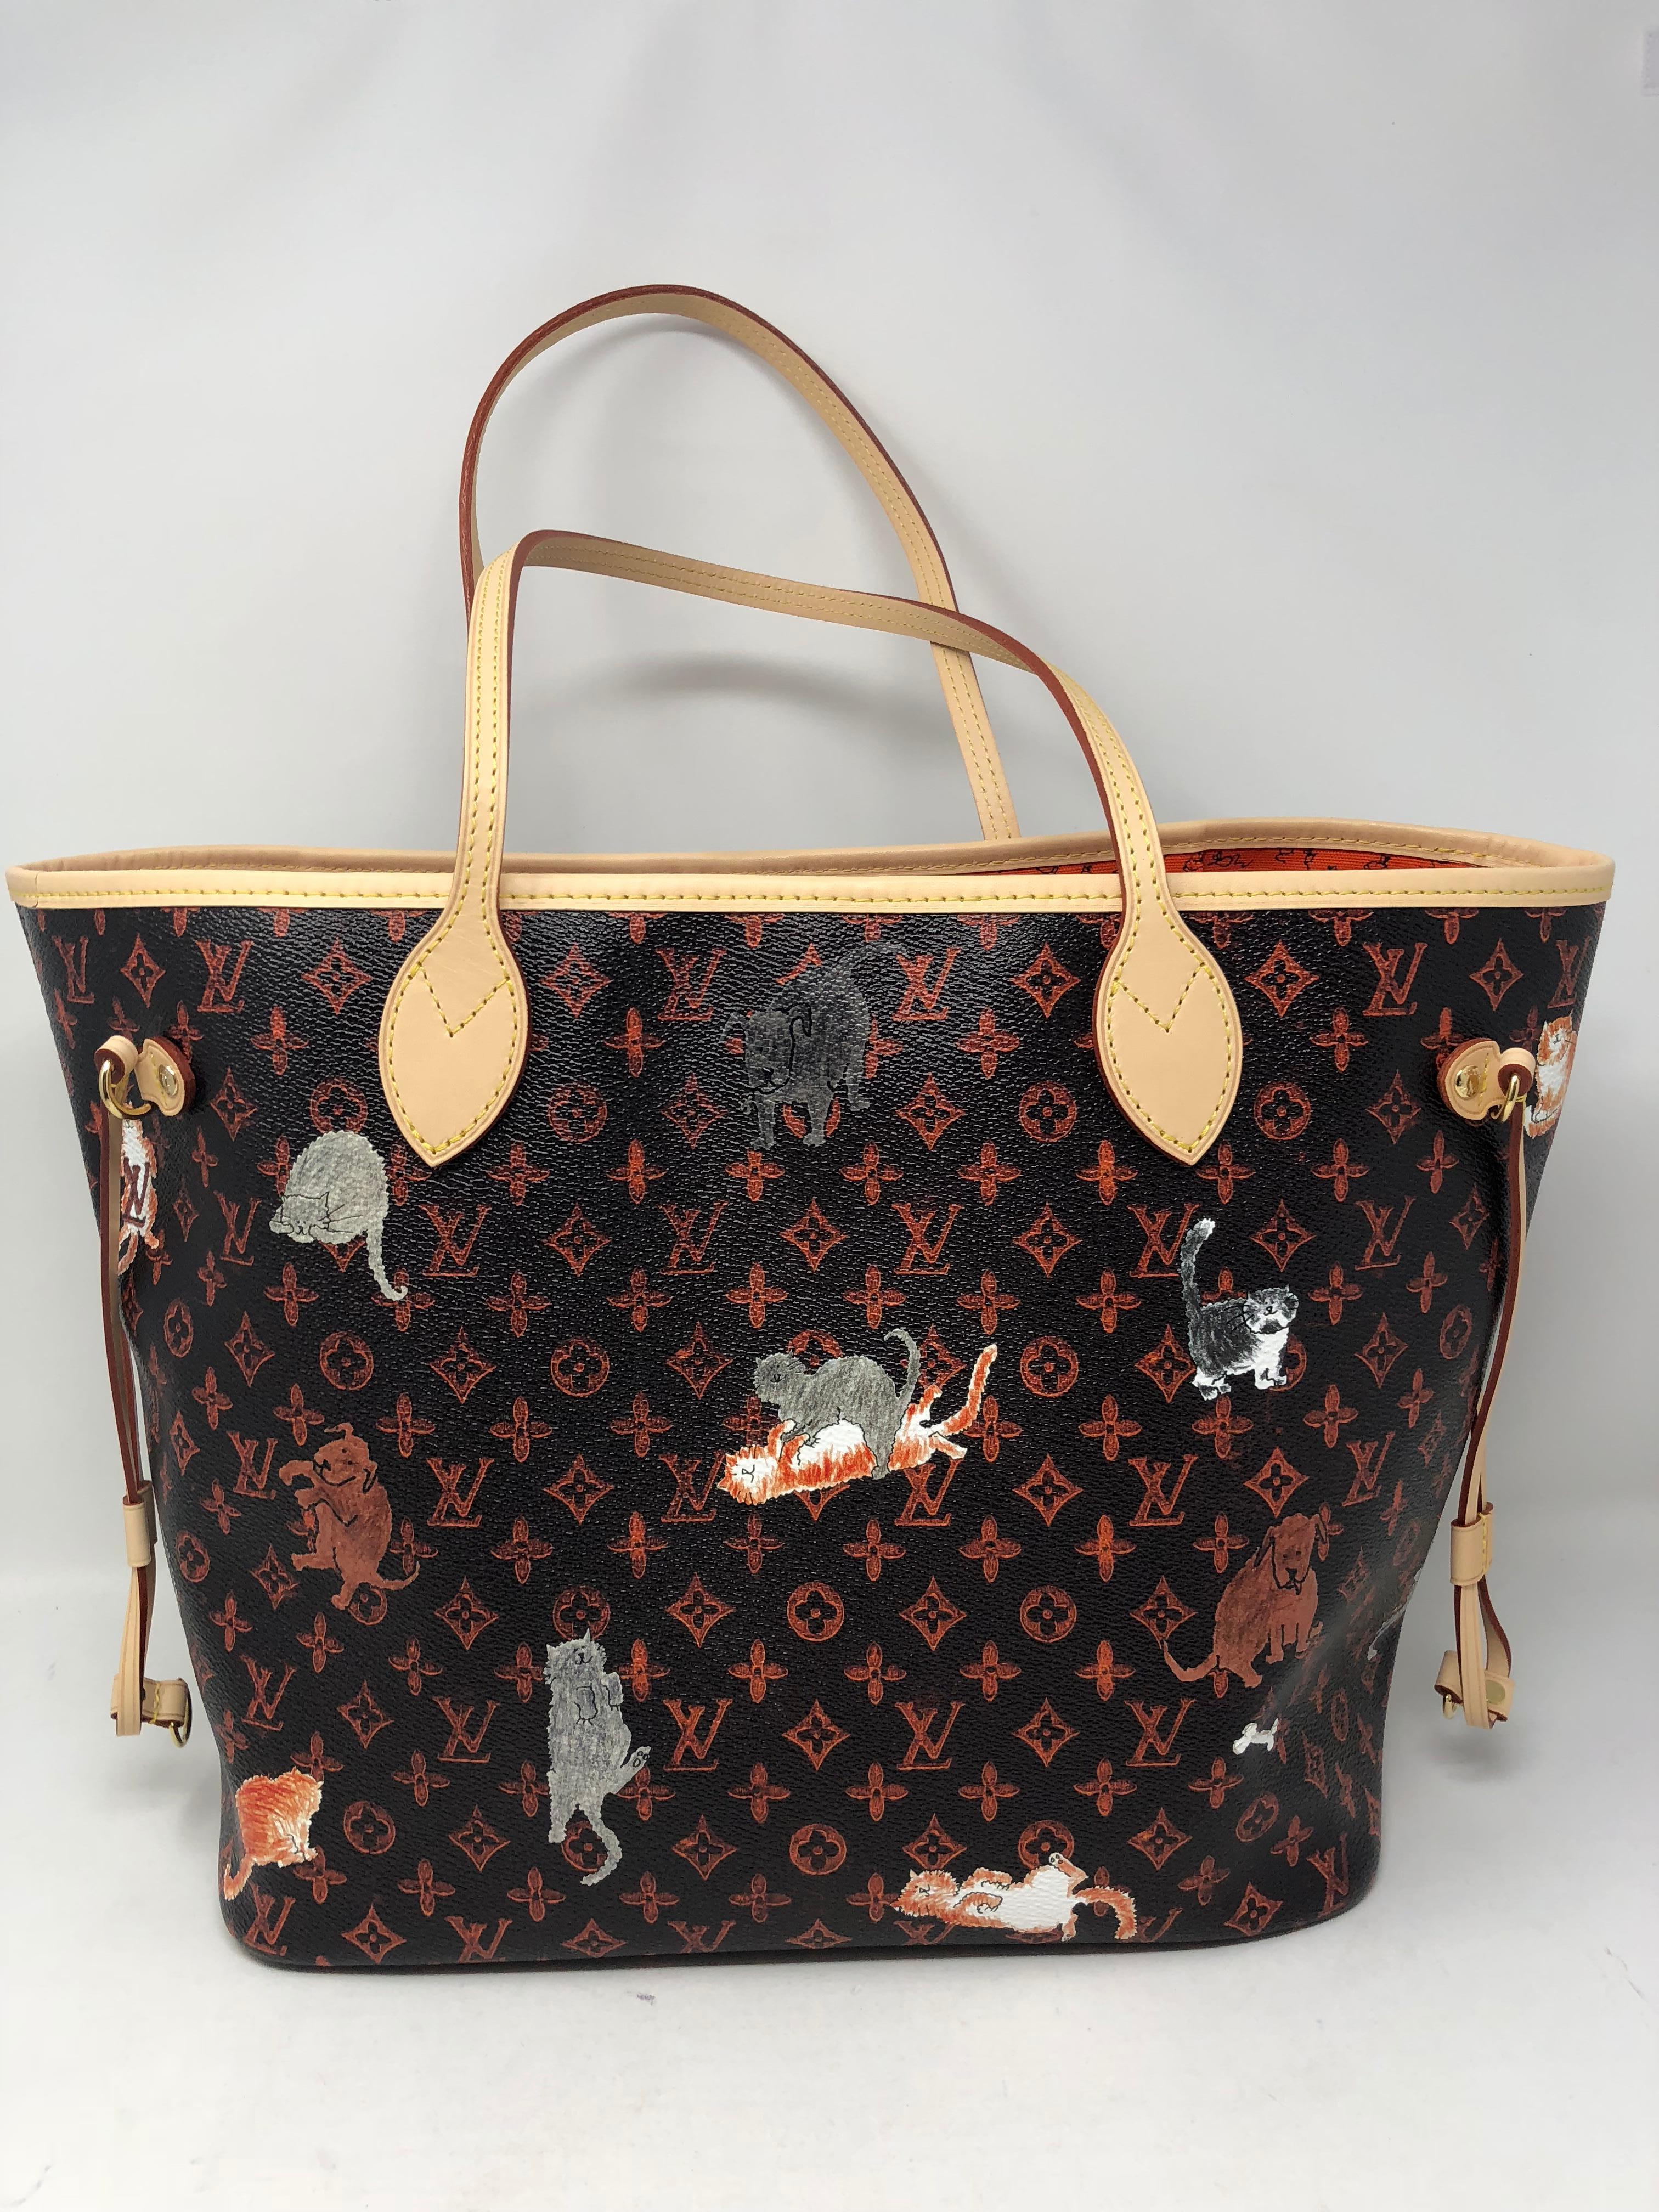 Louis Vuitton Catogram Neverfull by Grace Coddington. Epic design by Fashion editor for the love of animals. One of the most creative and fun designs by the house. Extremely limited and sold out. Brand new and includes full set. Don't miss out on